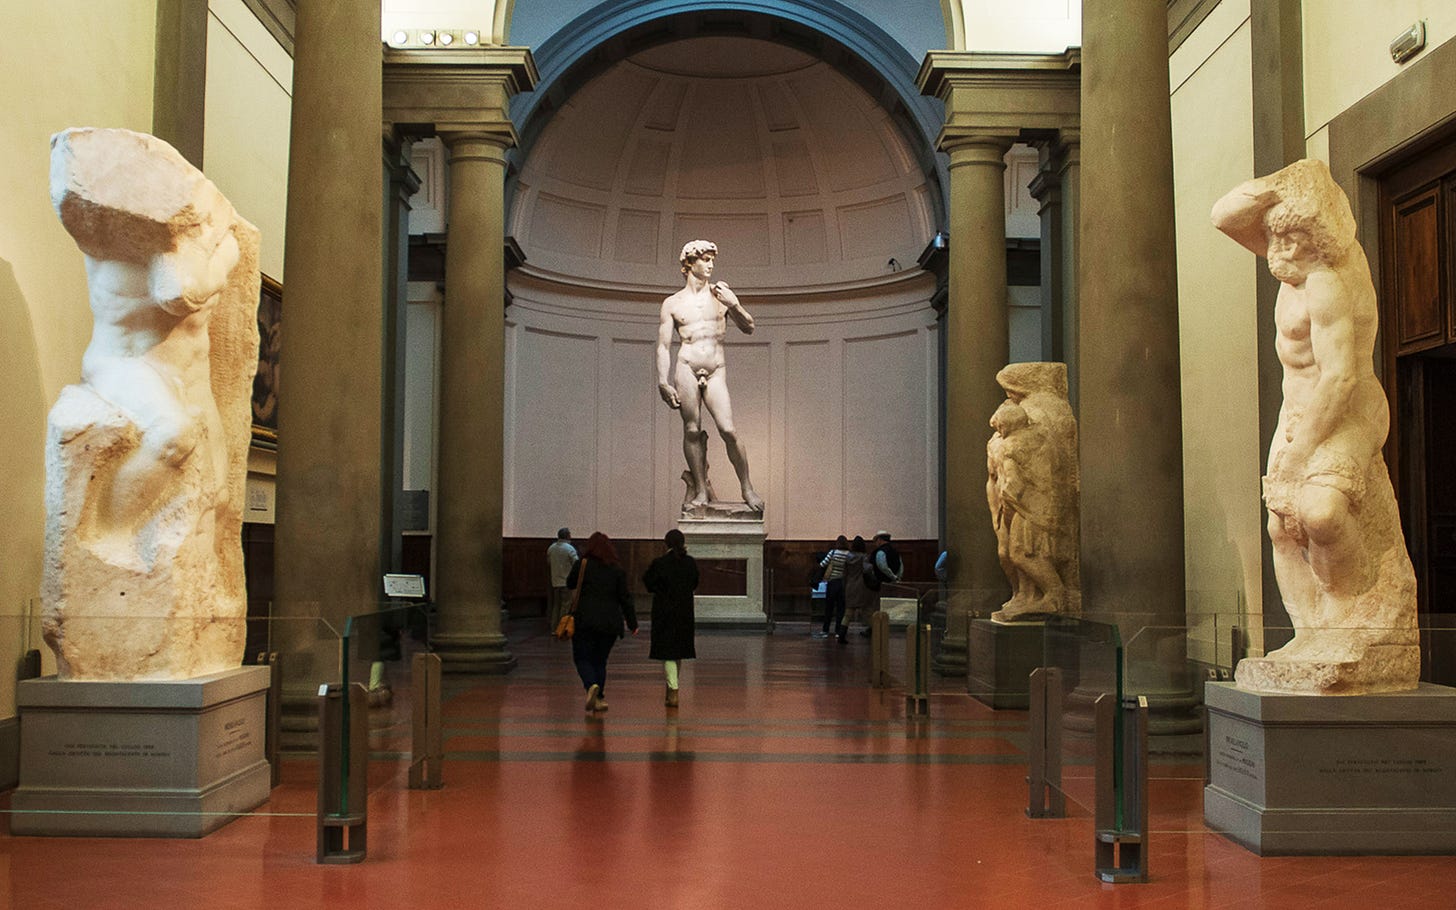 Discover Michelangelo's David at Accademia Gallery in Florence